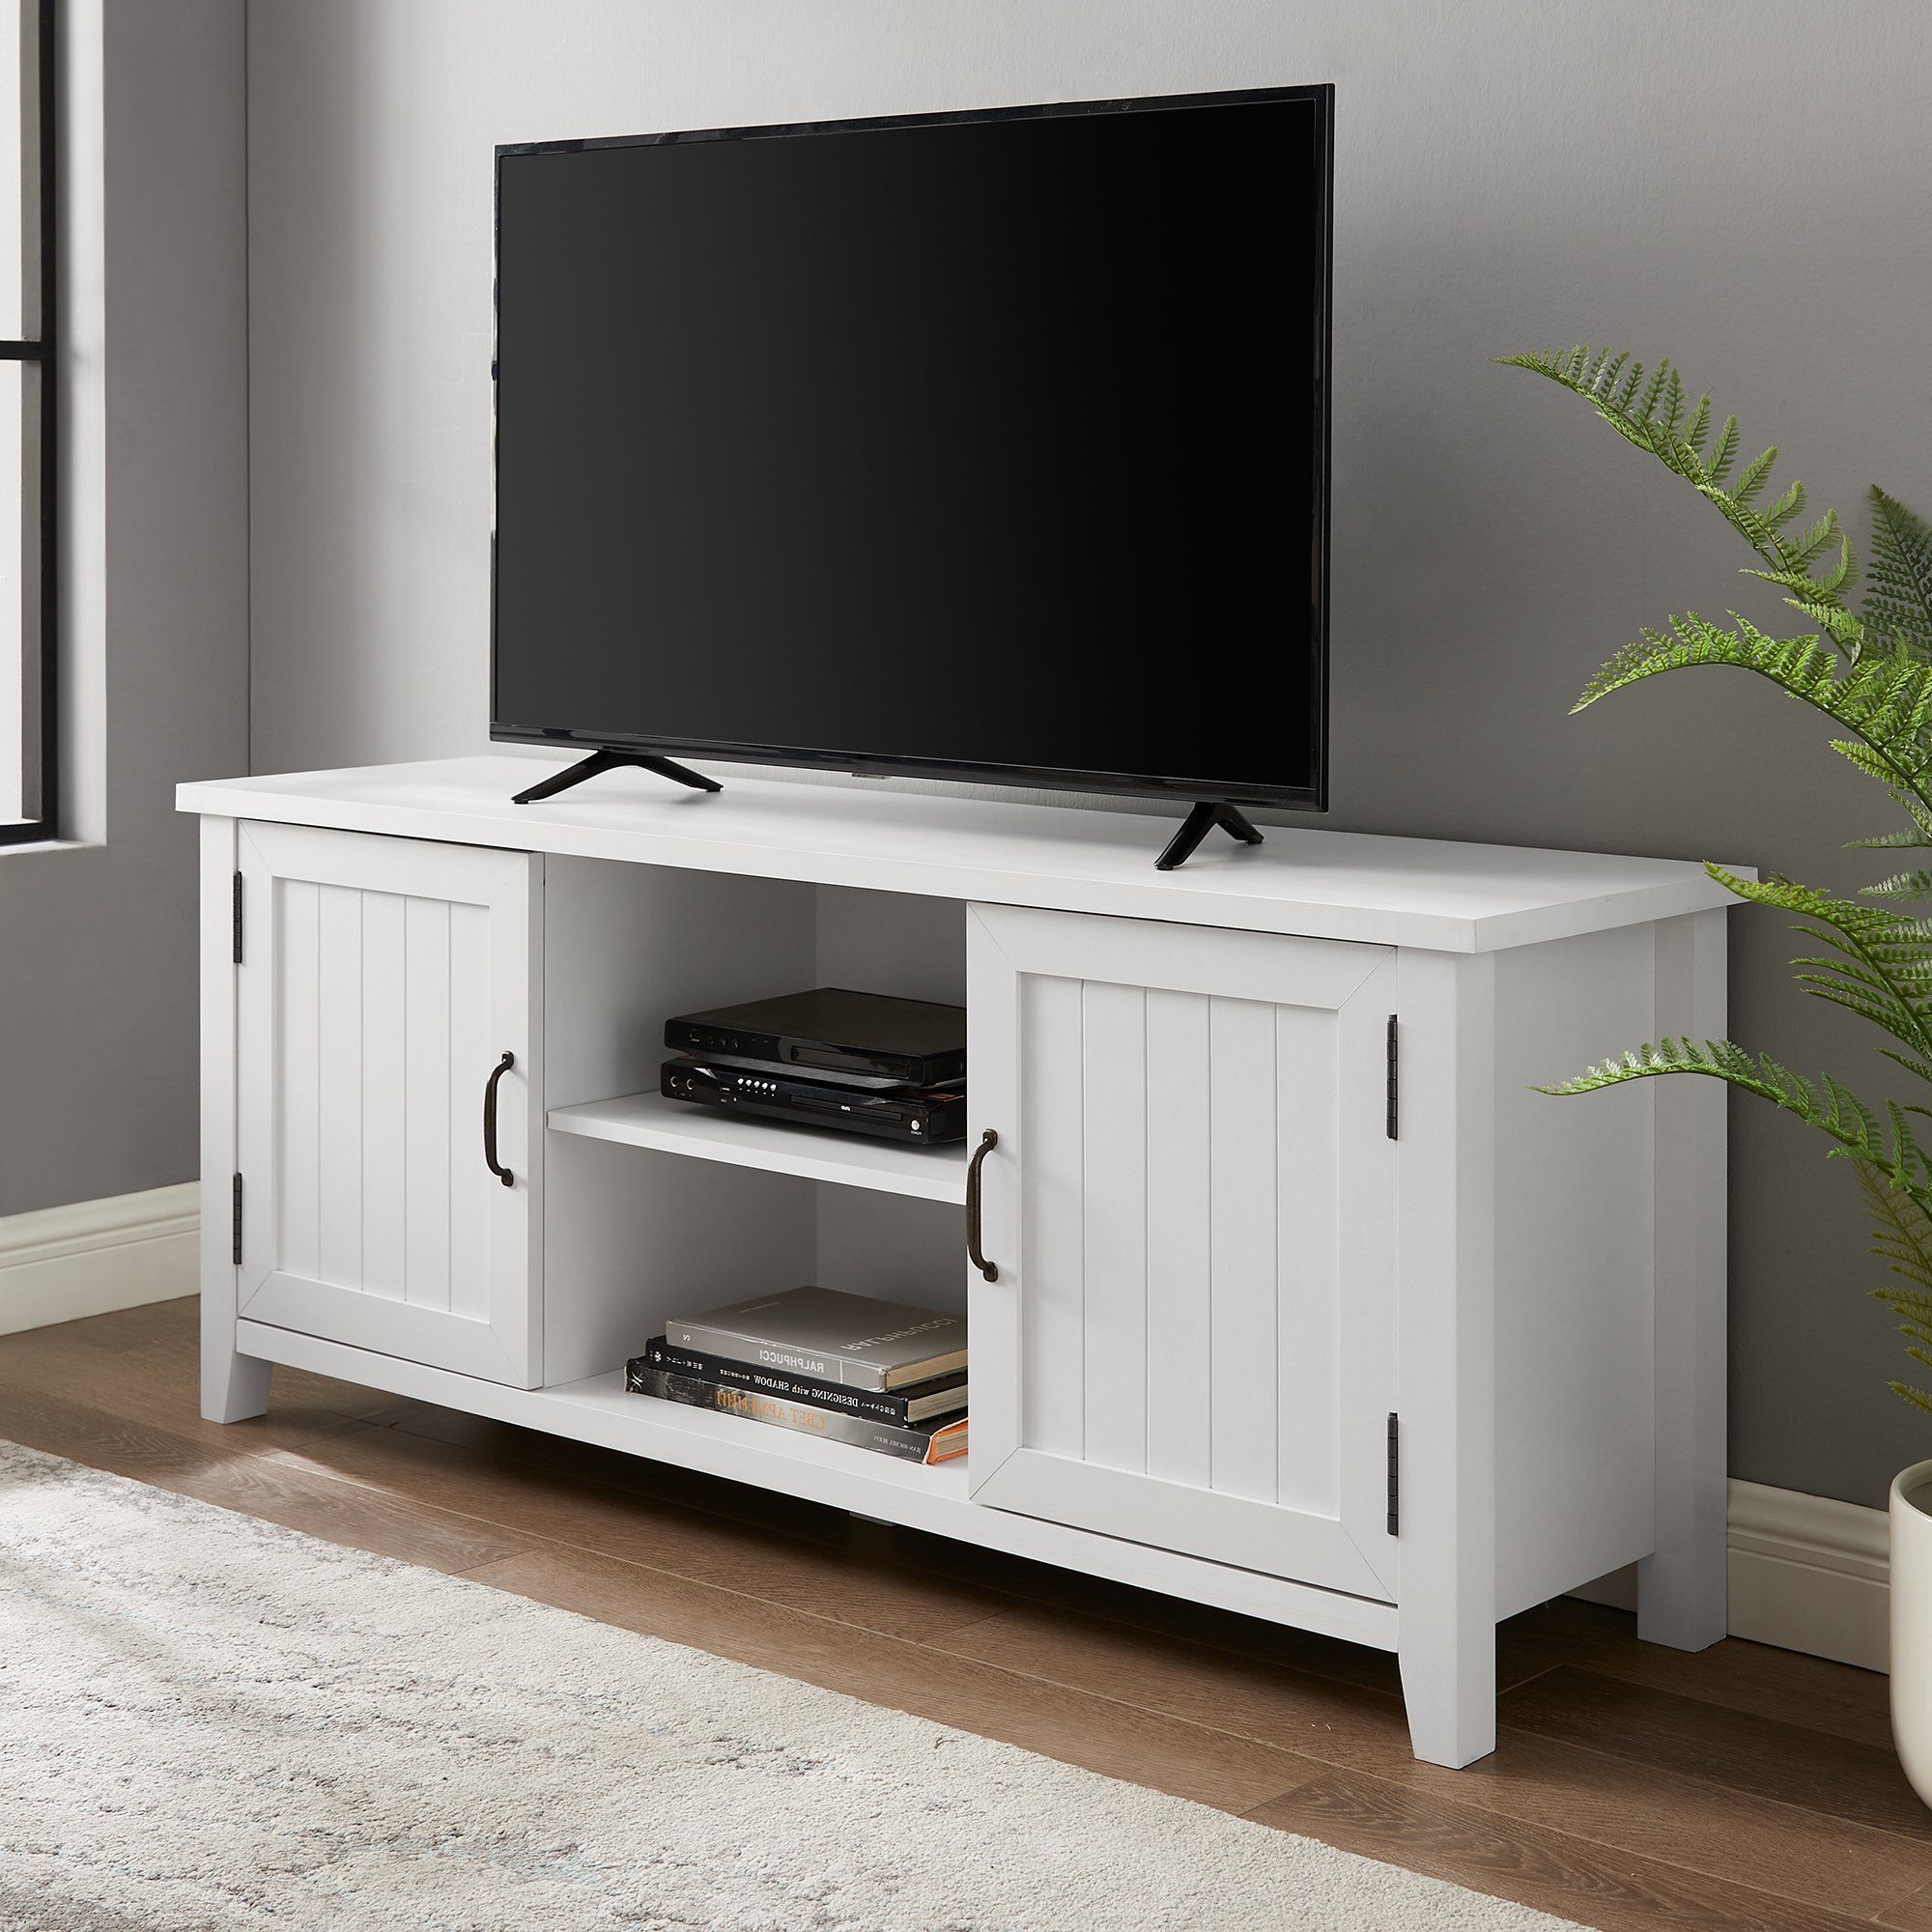 Solid White 58 Inch Grooved Door Tv Stand – Coastal For Walker Edison Farmhouse Tv Stands With Storage Cabinet Doors And Shelves (View 5 of 20)